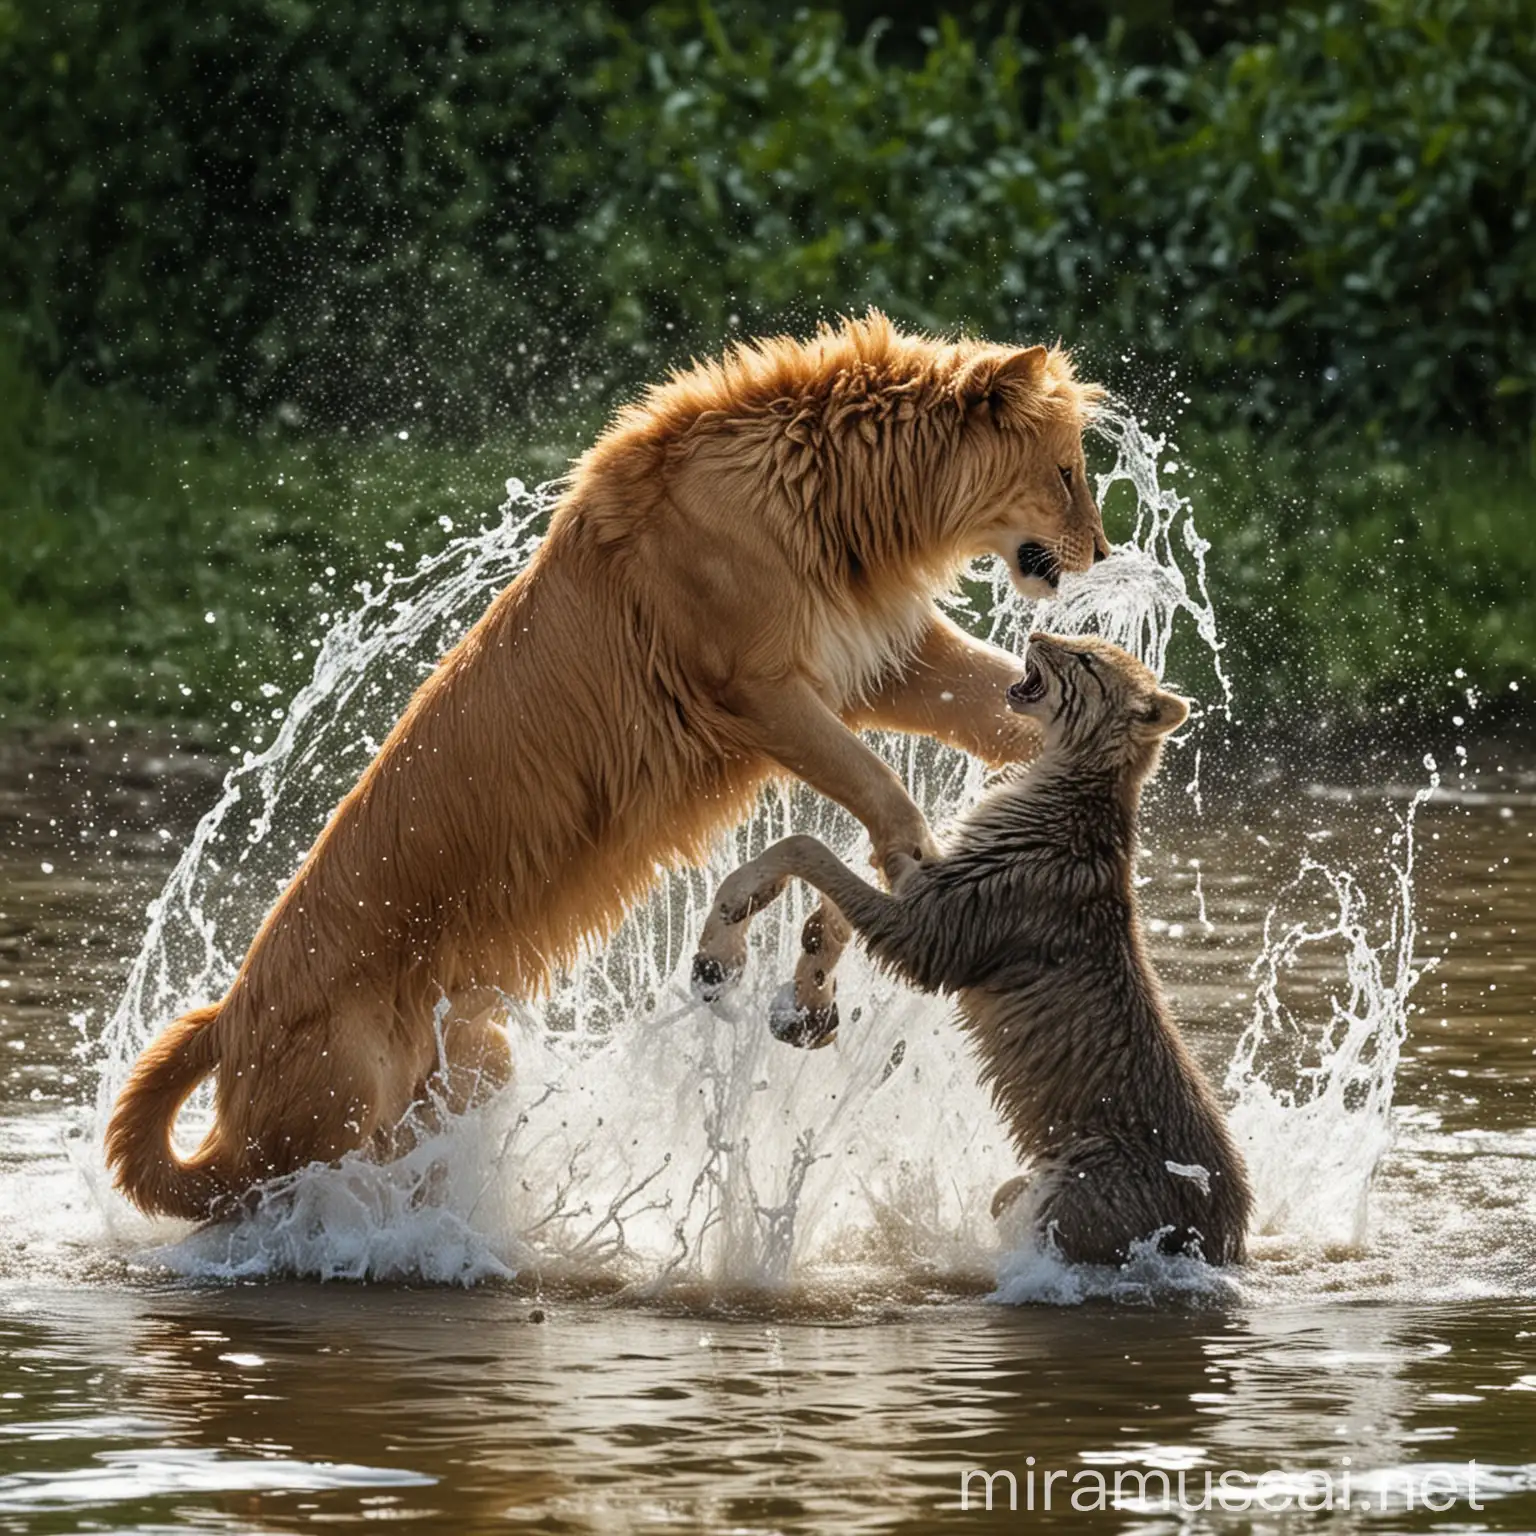 Playful Animals Frolicking in Water